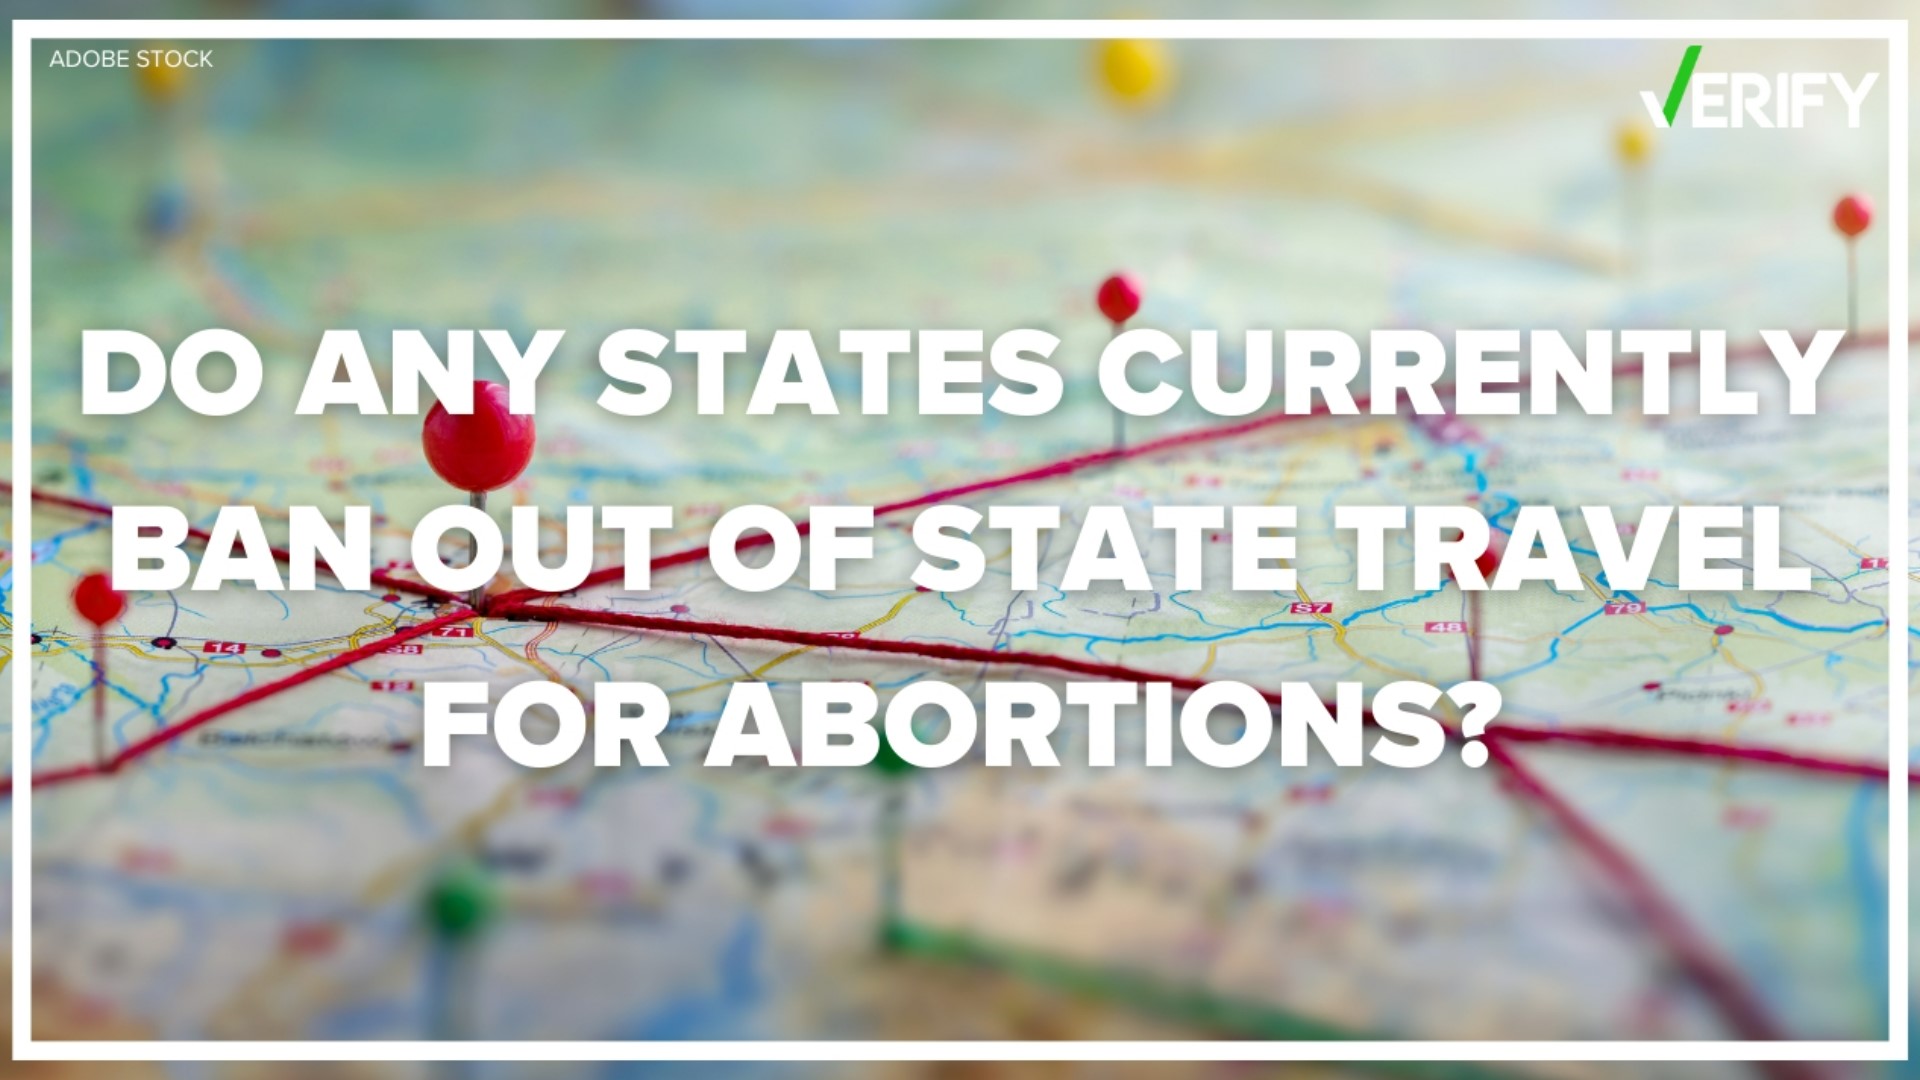 Although some legislation has been floated to ban out-of-state travel for abortions, nothing has been passed yet in any state.